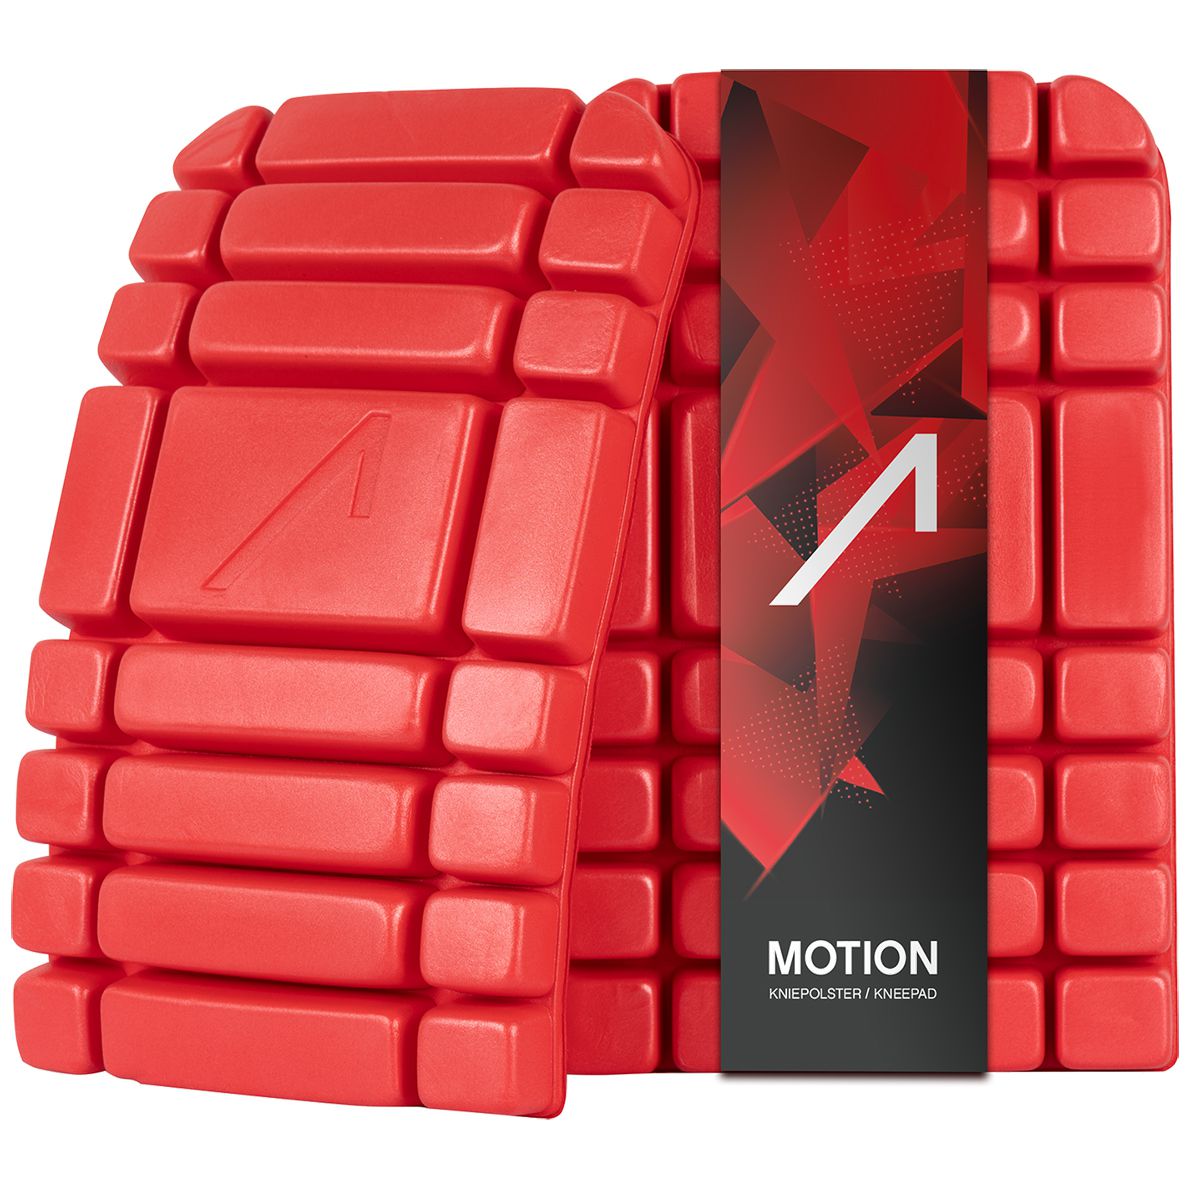 ACE Motion knee cushion - Knee pads for work - ideal for tilers